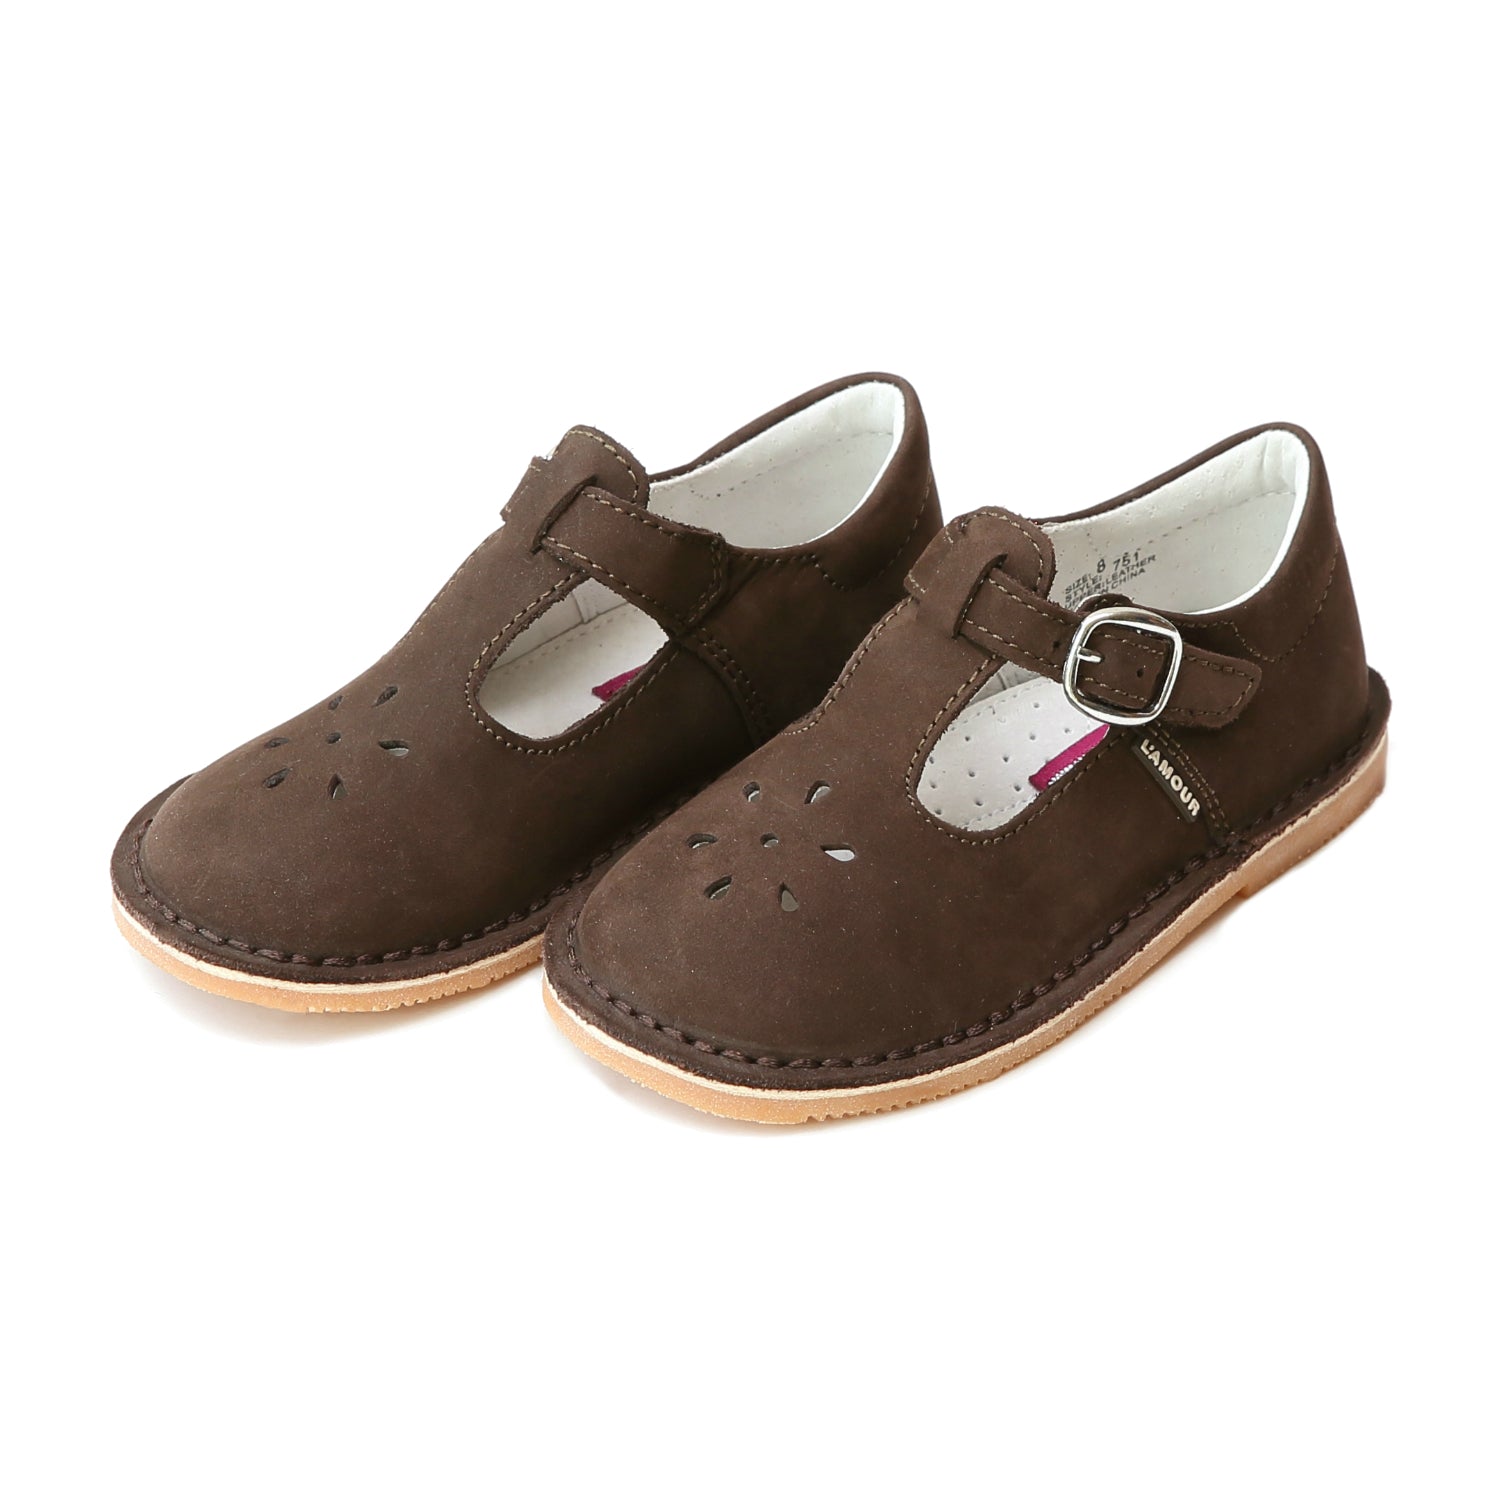 L'Amour Joy Classic Nubuck Leather T-Strap Mary Jane Mary Janes